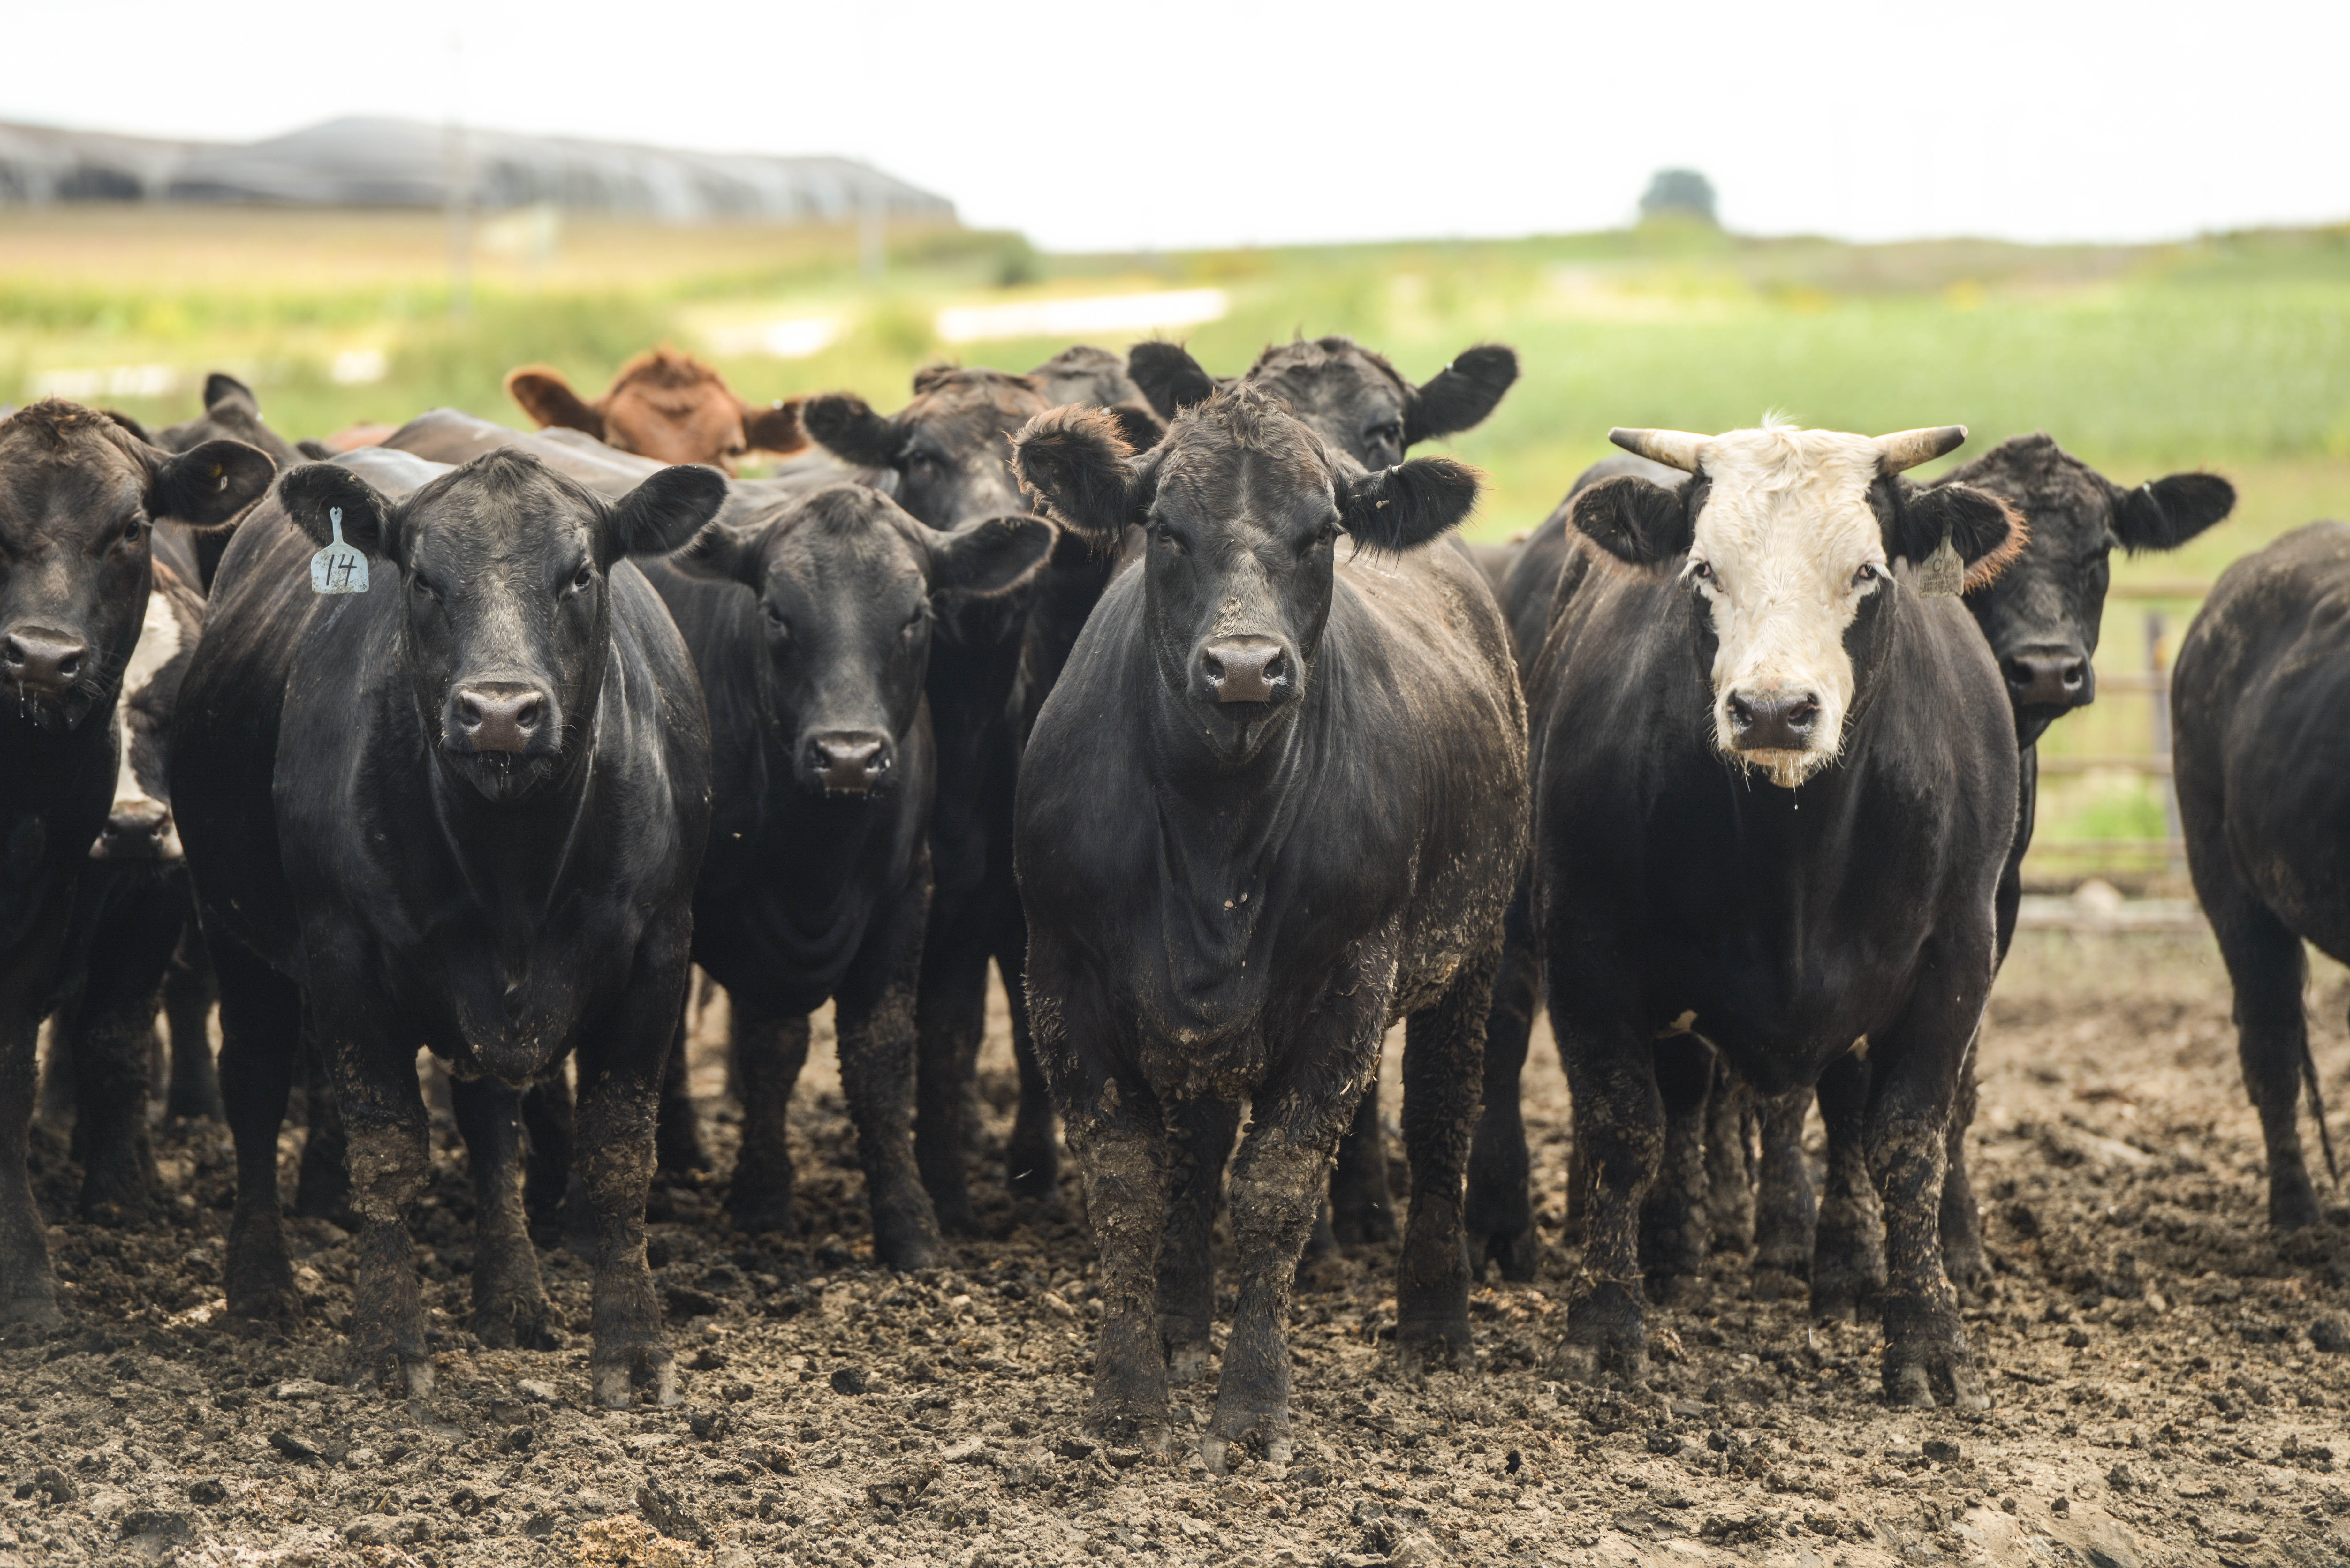 A group of cattle stand together